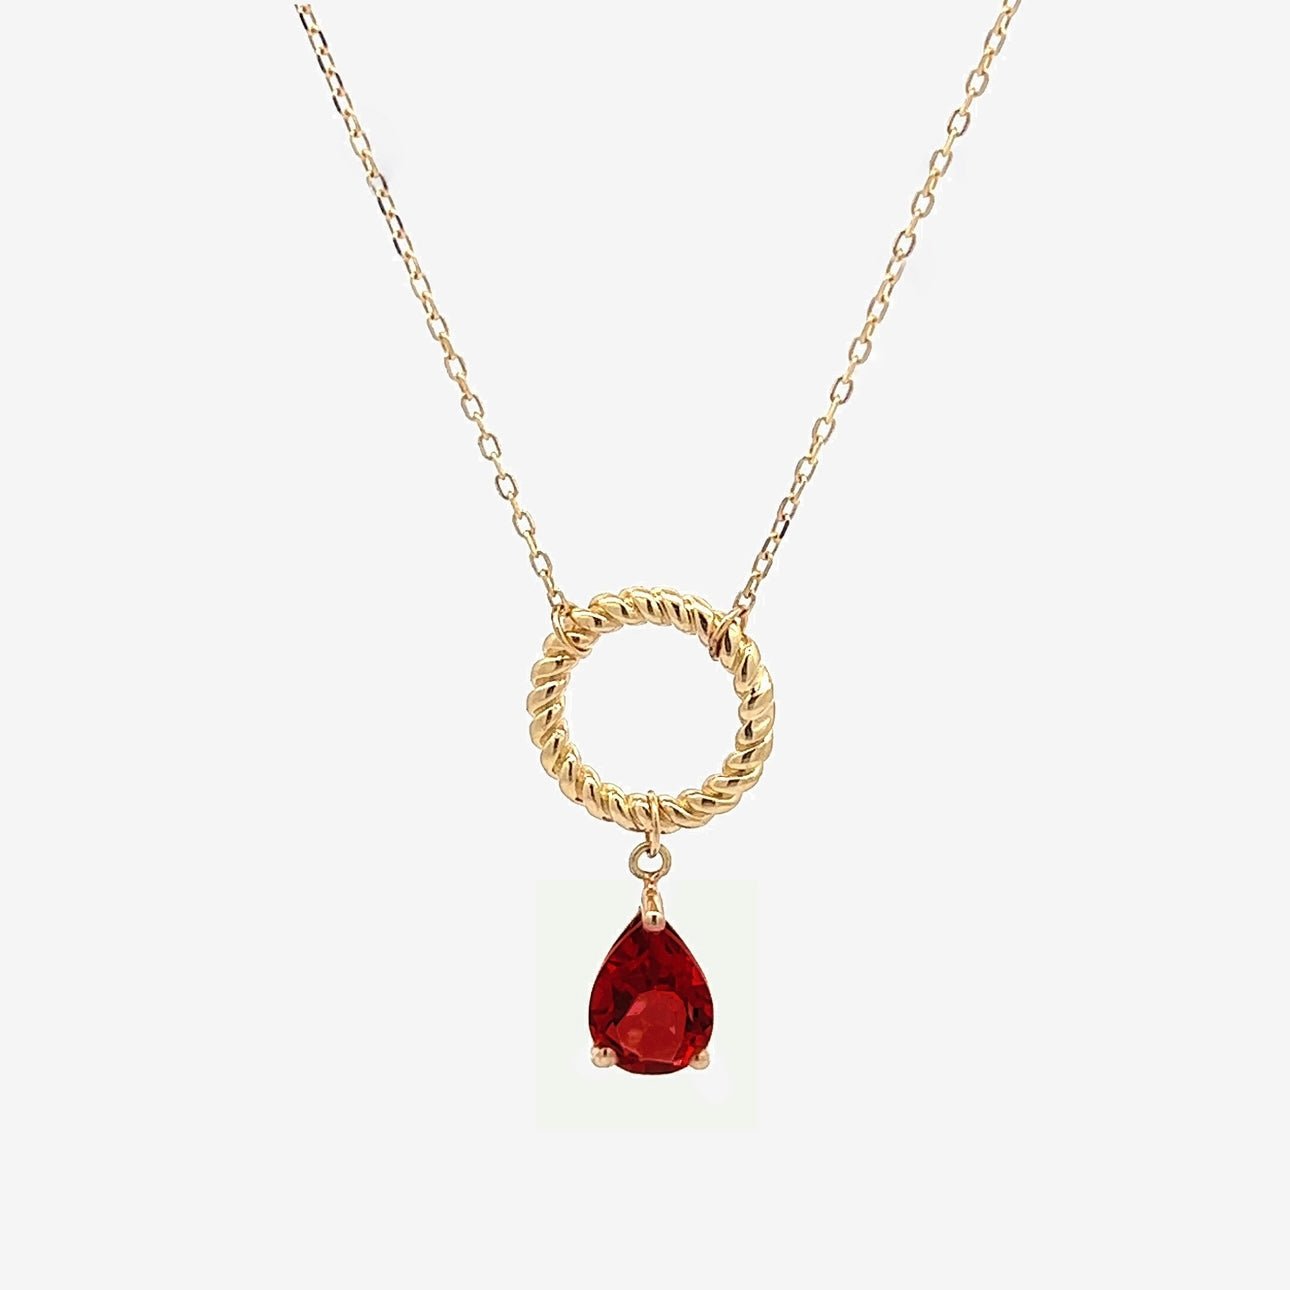 Gina Necklace in Red Garnet - 18k Gold - Ly